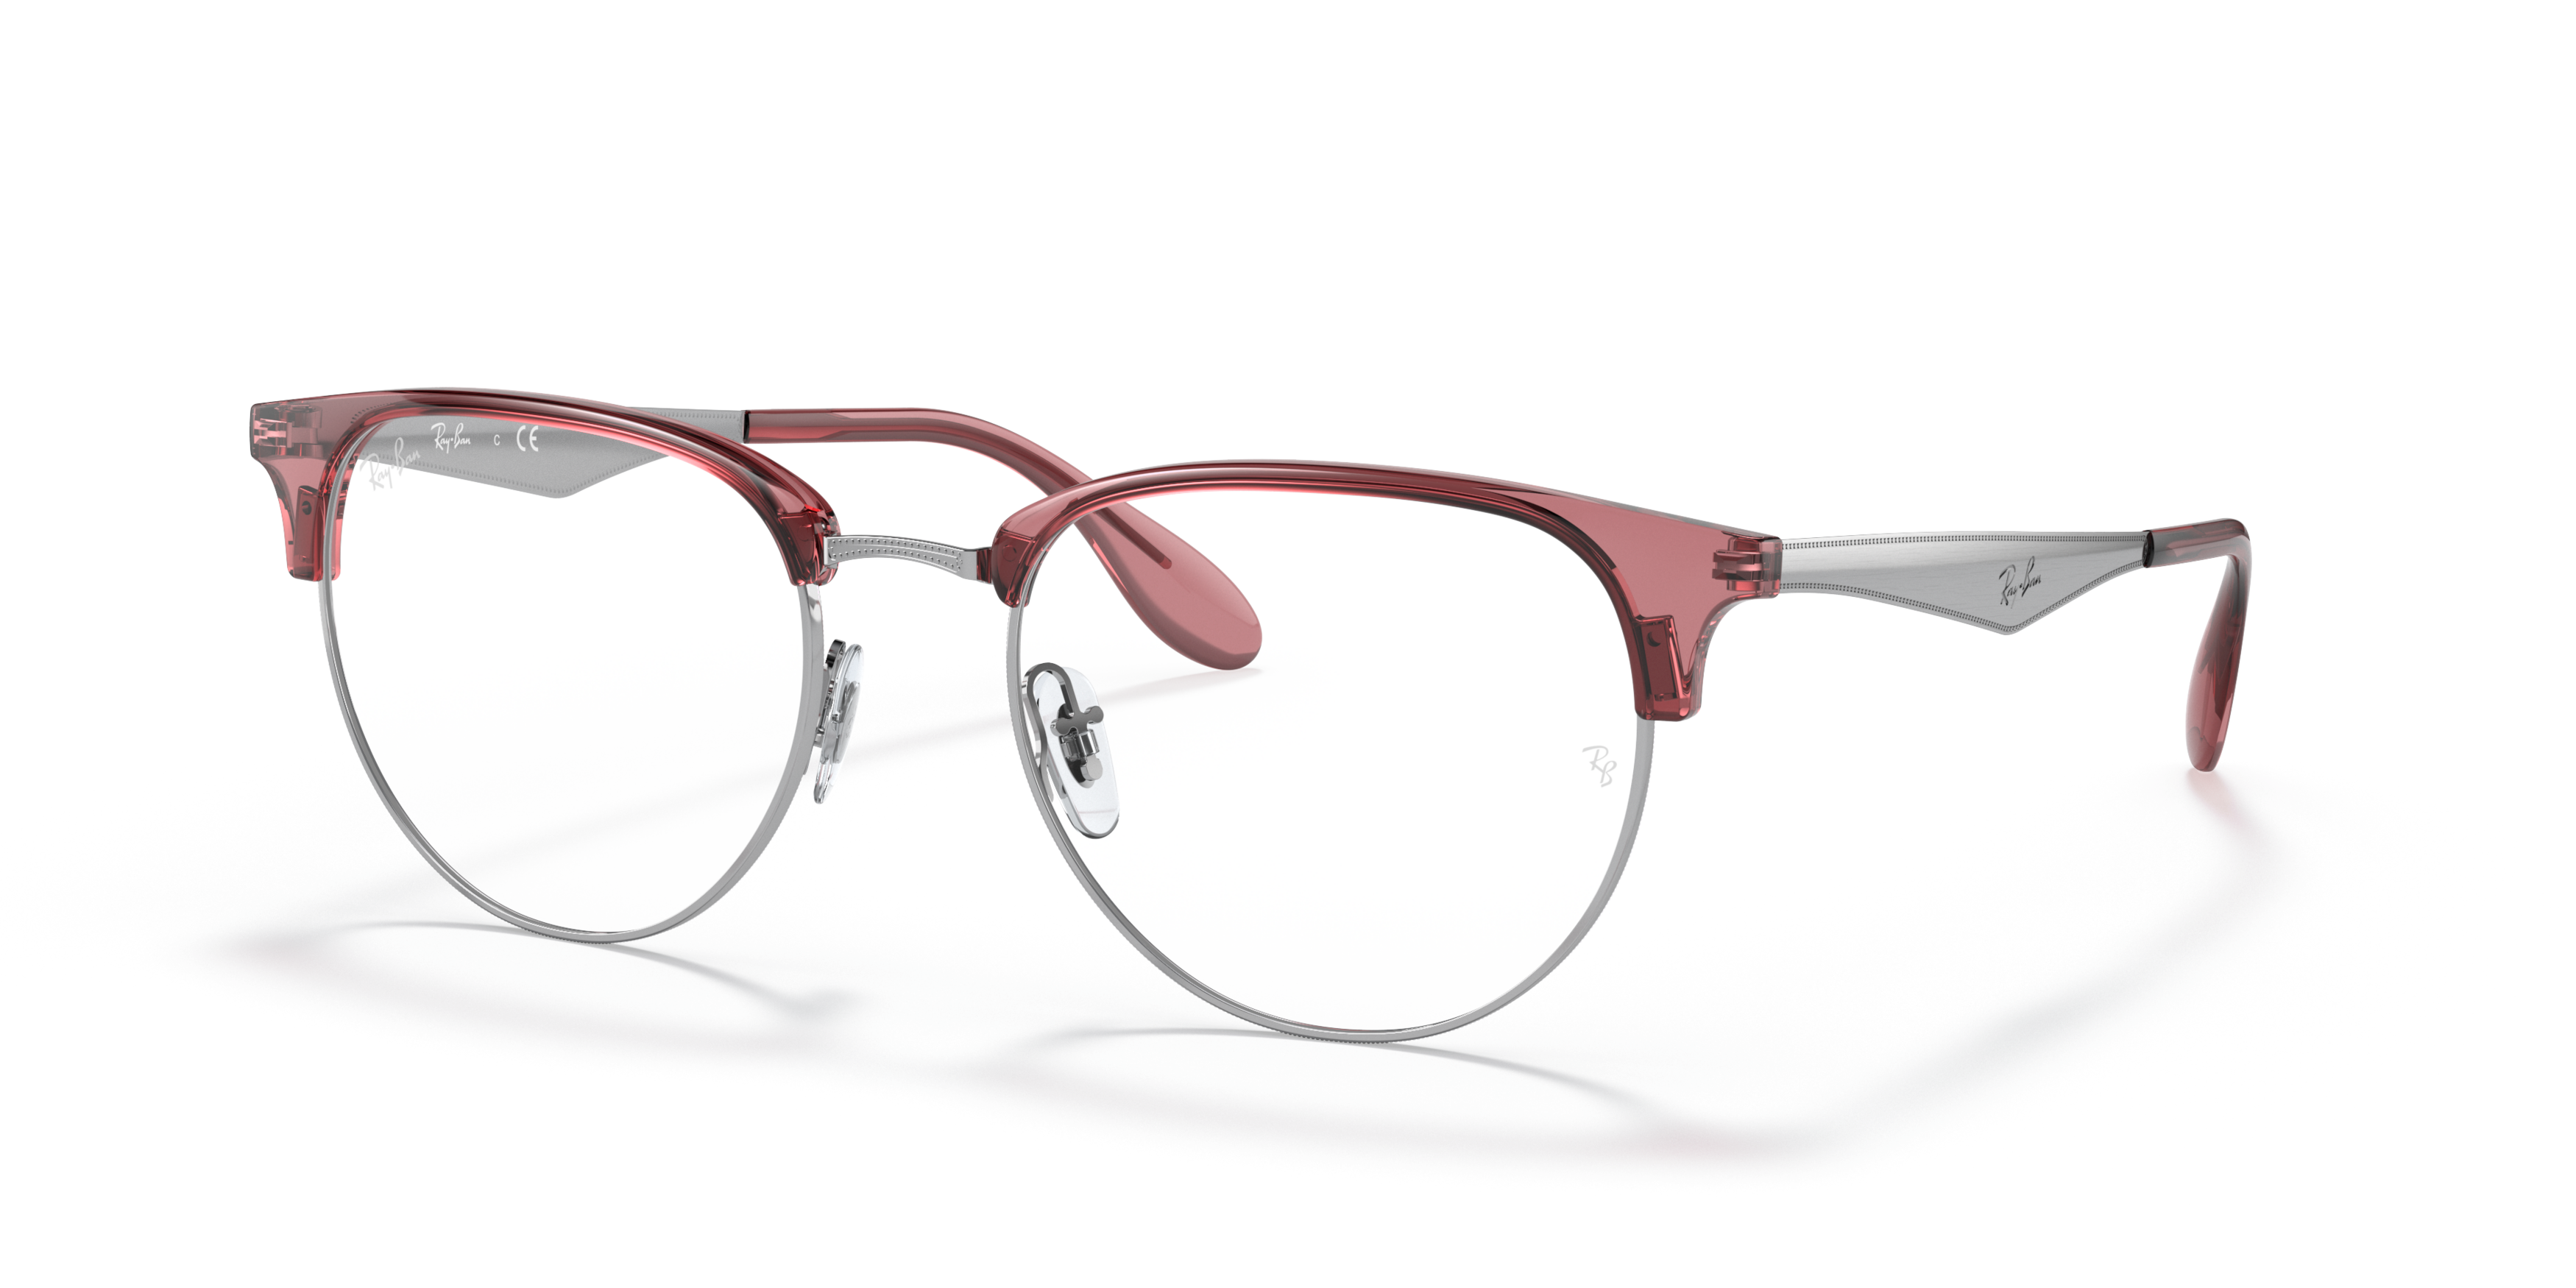 Angle_Left01 Ray-Ban RX 6396 Glasses Transparent / Transparent, Red